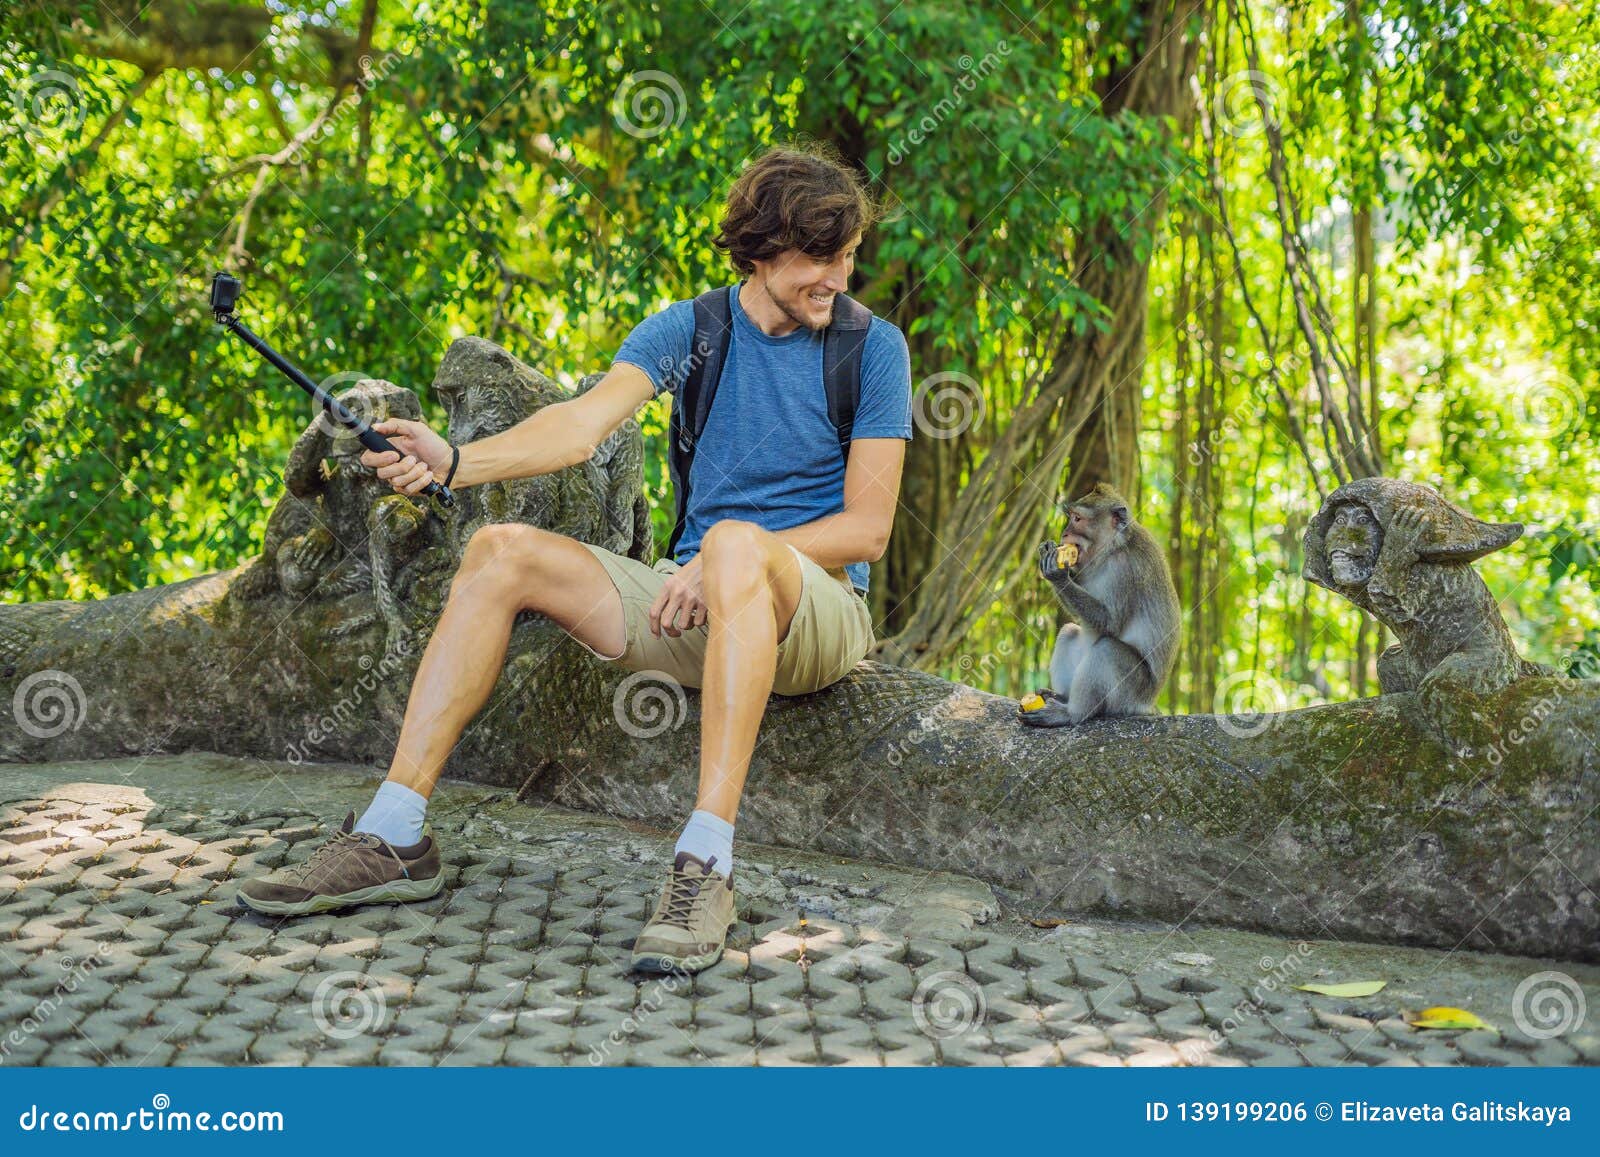 Selfie with Monkeys. Young Man Uses a Selfie Stick To Take a Photo or Video  Blog with Cute Funny Monkey Stock Photo - Image of mobile, blog: 139199206